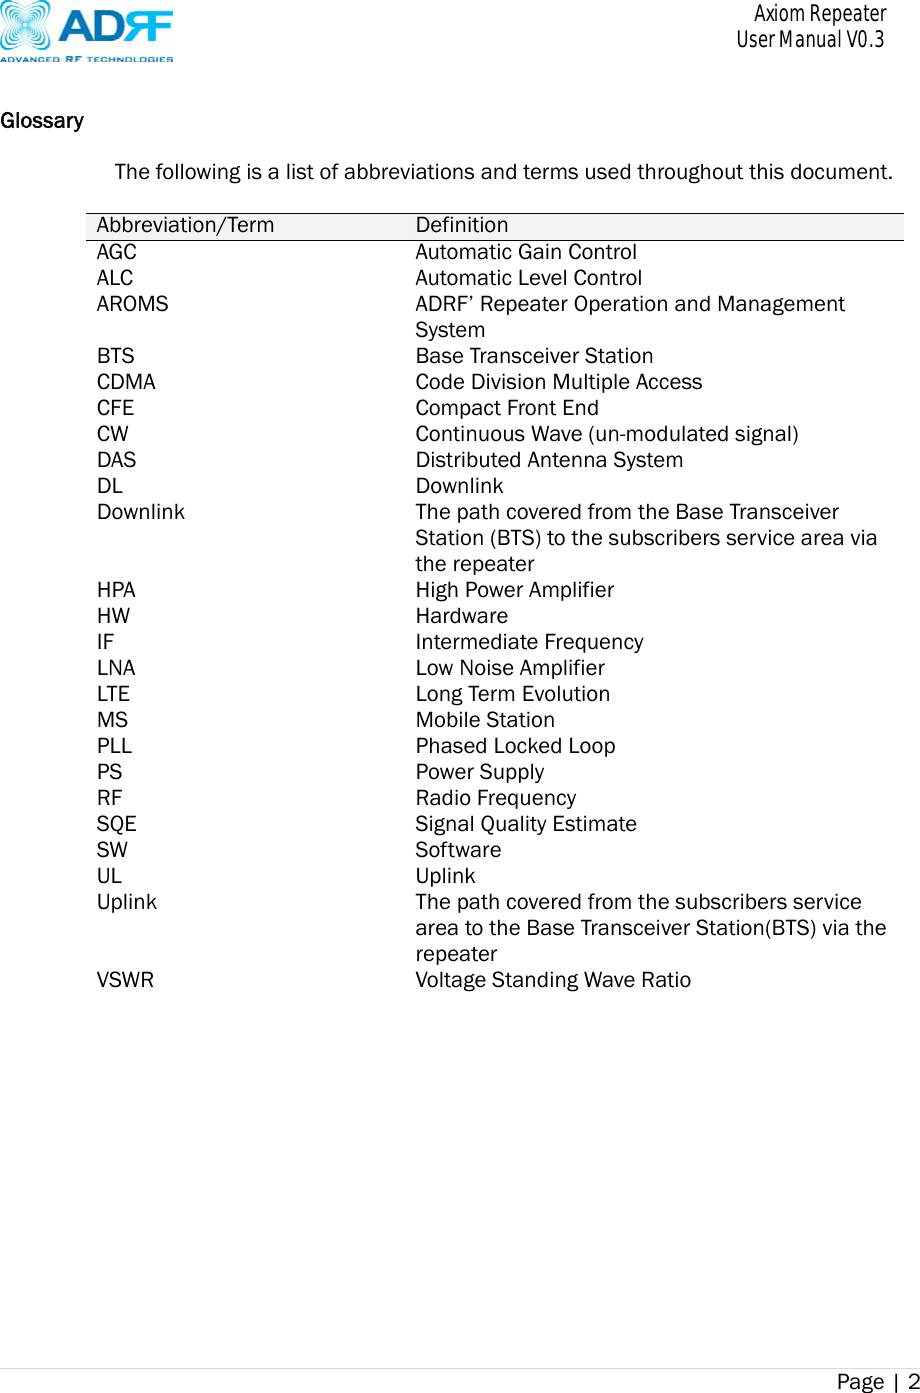       Axiom Repeater     User Manual V0.3 Page | 2     Glossary The following is a list of abbreviations and terms used throughout this document.  Abbreviation/Term  DefinitionAGC Automatic Gain ControlALC  Automatic Level ControlAROMS  ADRF’ Repeater Operation and Management System BTS  Base Transceiver StationCDMA  Code Division Multiple AccessCFE  Compact Front EndCW  Continuous Wave (un-modulated signal) DAS  Distributed Antenna SystemDL DownlinkDownlink  The path covered from the Base Transceiver Station (BTS) to the subscribers service area via the repeater HPA  High Power AmplifierHW HardwareIF Intermediate FrequencyLNA LTE Low Noise AmplifierLong Term Evolution MS Mobile Station PLL  Phased Locked LoopPS Power SupplyRF Radio FrequencySQE  Signal Quality EstimateSW SoftwareUL UplinkUplink  The path covered from the subscribers service area to the Base Transceiver Station(BTS) via the repeater  VSWR  Voltage Standing Wave Ratio 